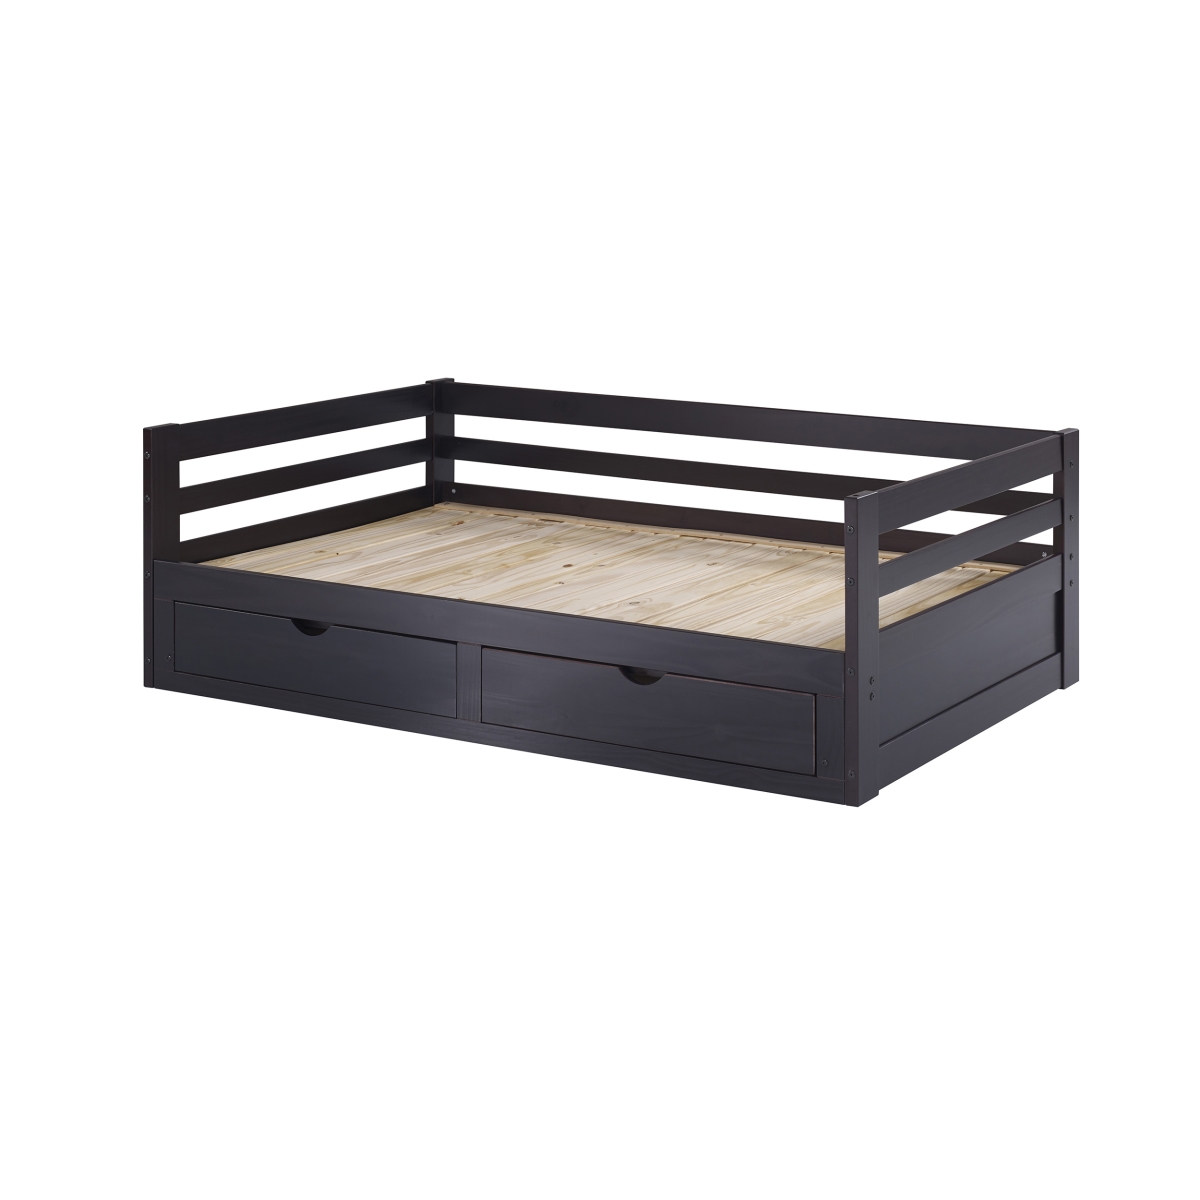 Picture of Alaterre AJJP10P0 Jasper Twin to King Size Extending Day Bed with Storage Drawers, Espresso